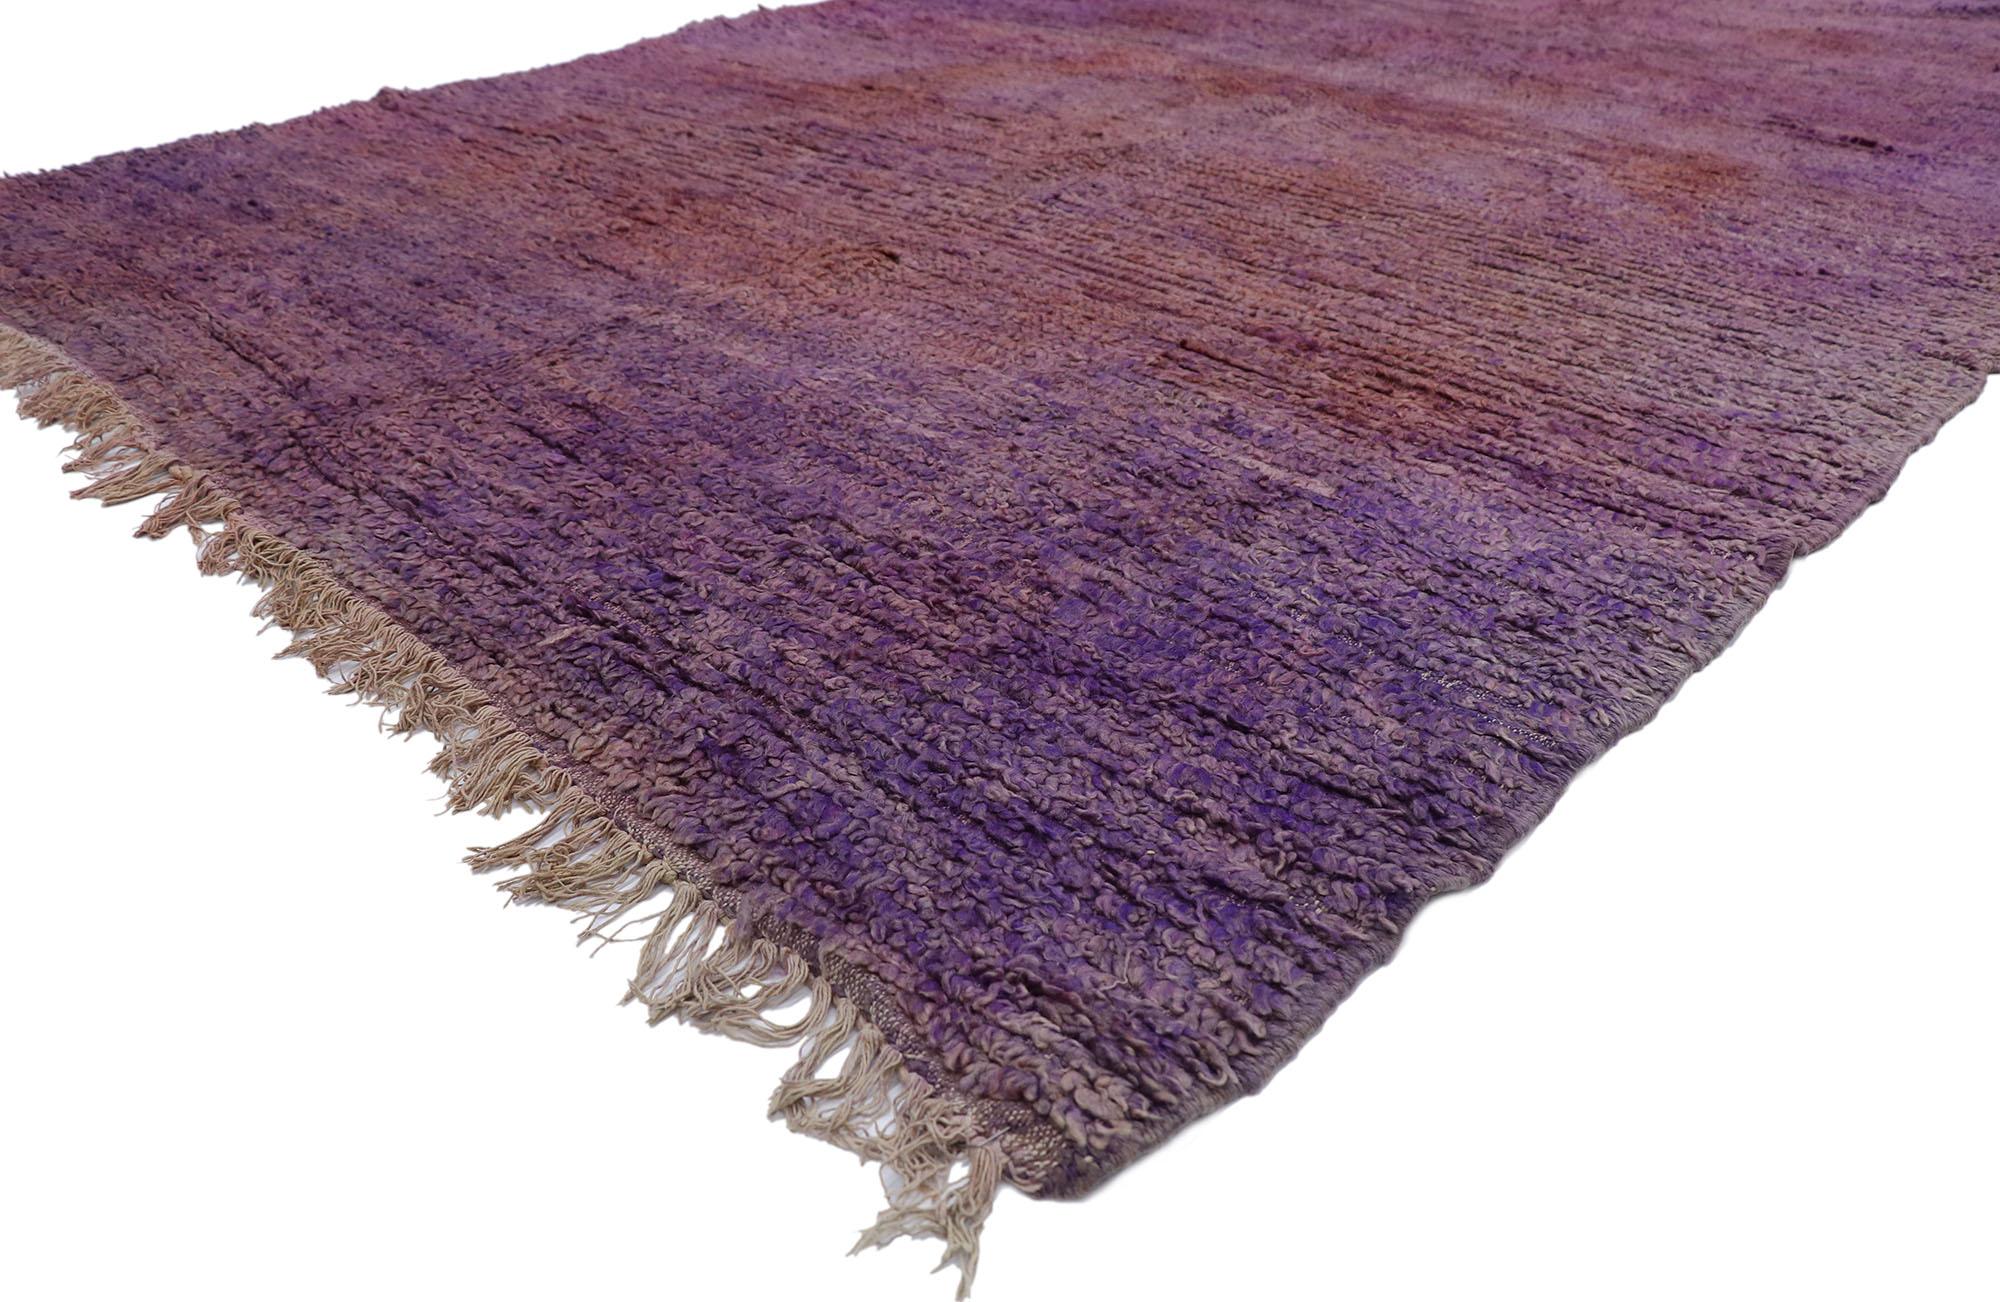 21478, vintage Berber Purple Beni Mrirt Moroccan rug with Bohemian style. With its simplicity, plush pile and Bohemian vibes, this hand knotted wool vintage Berber Beni Mrirt Moroccan rug is a captivating vision of woven beauty. Imbued with brick